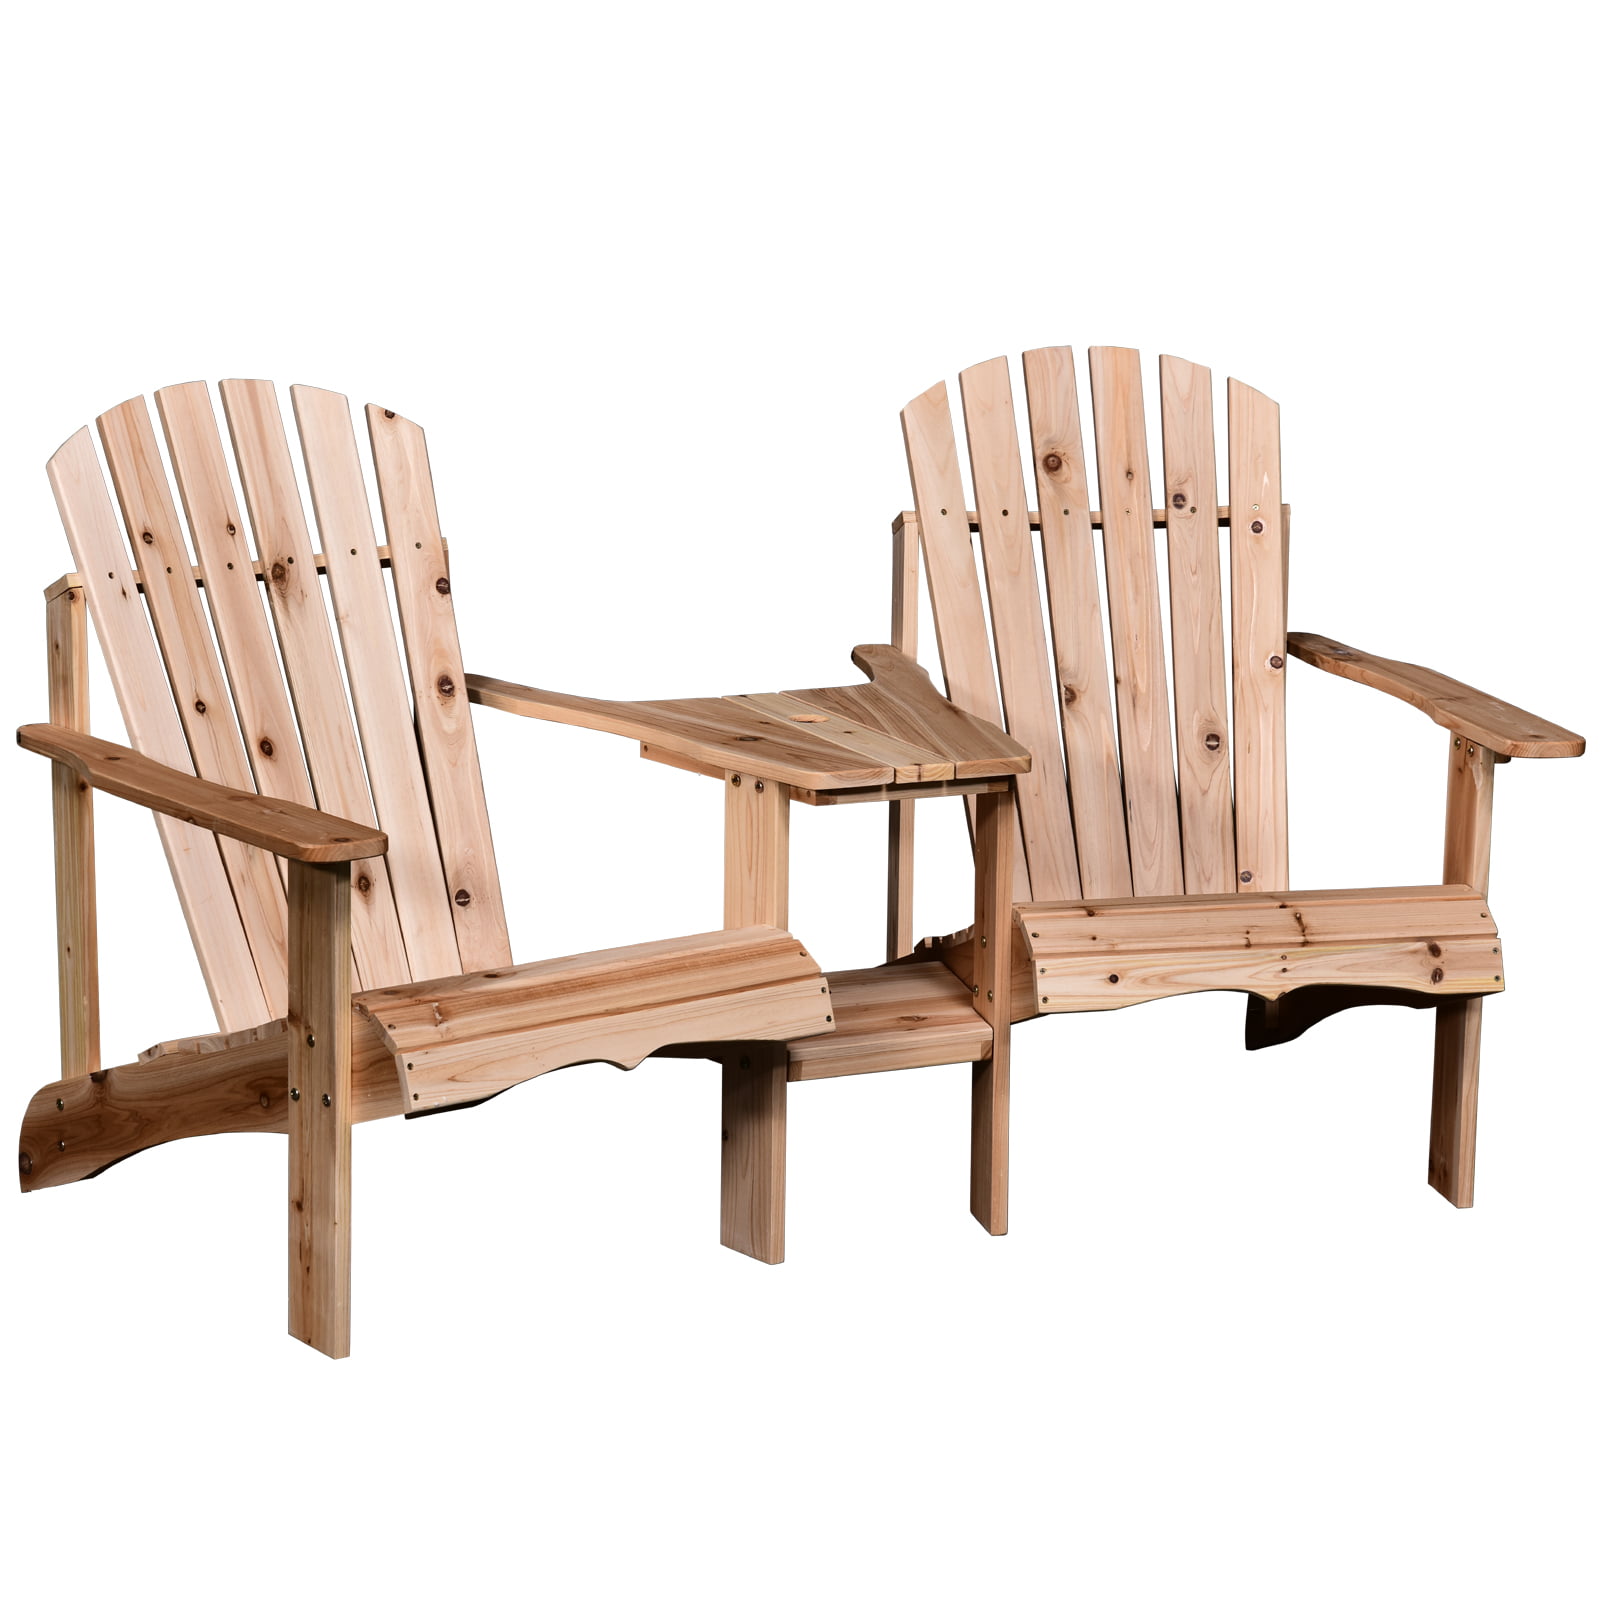 Outsunny Wooden Outdoor Double Adirondack Chairs with